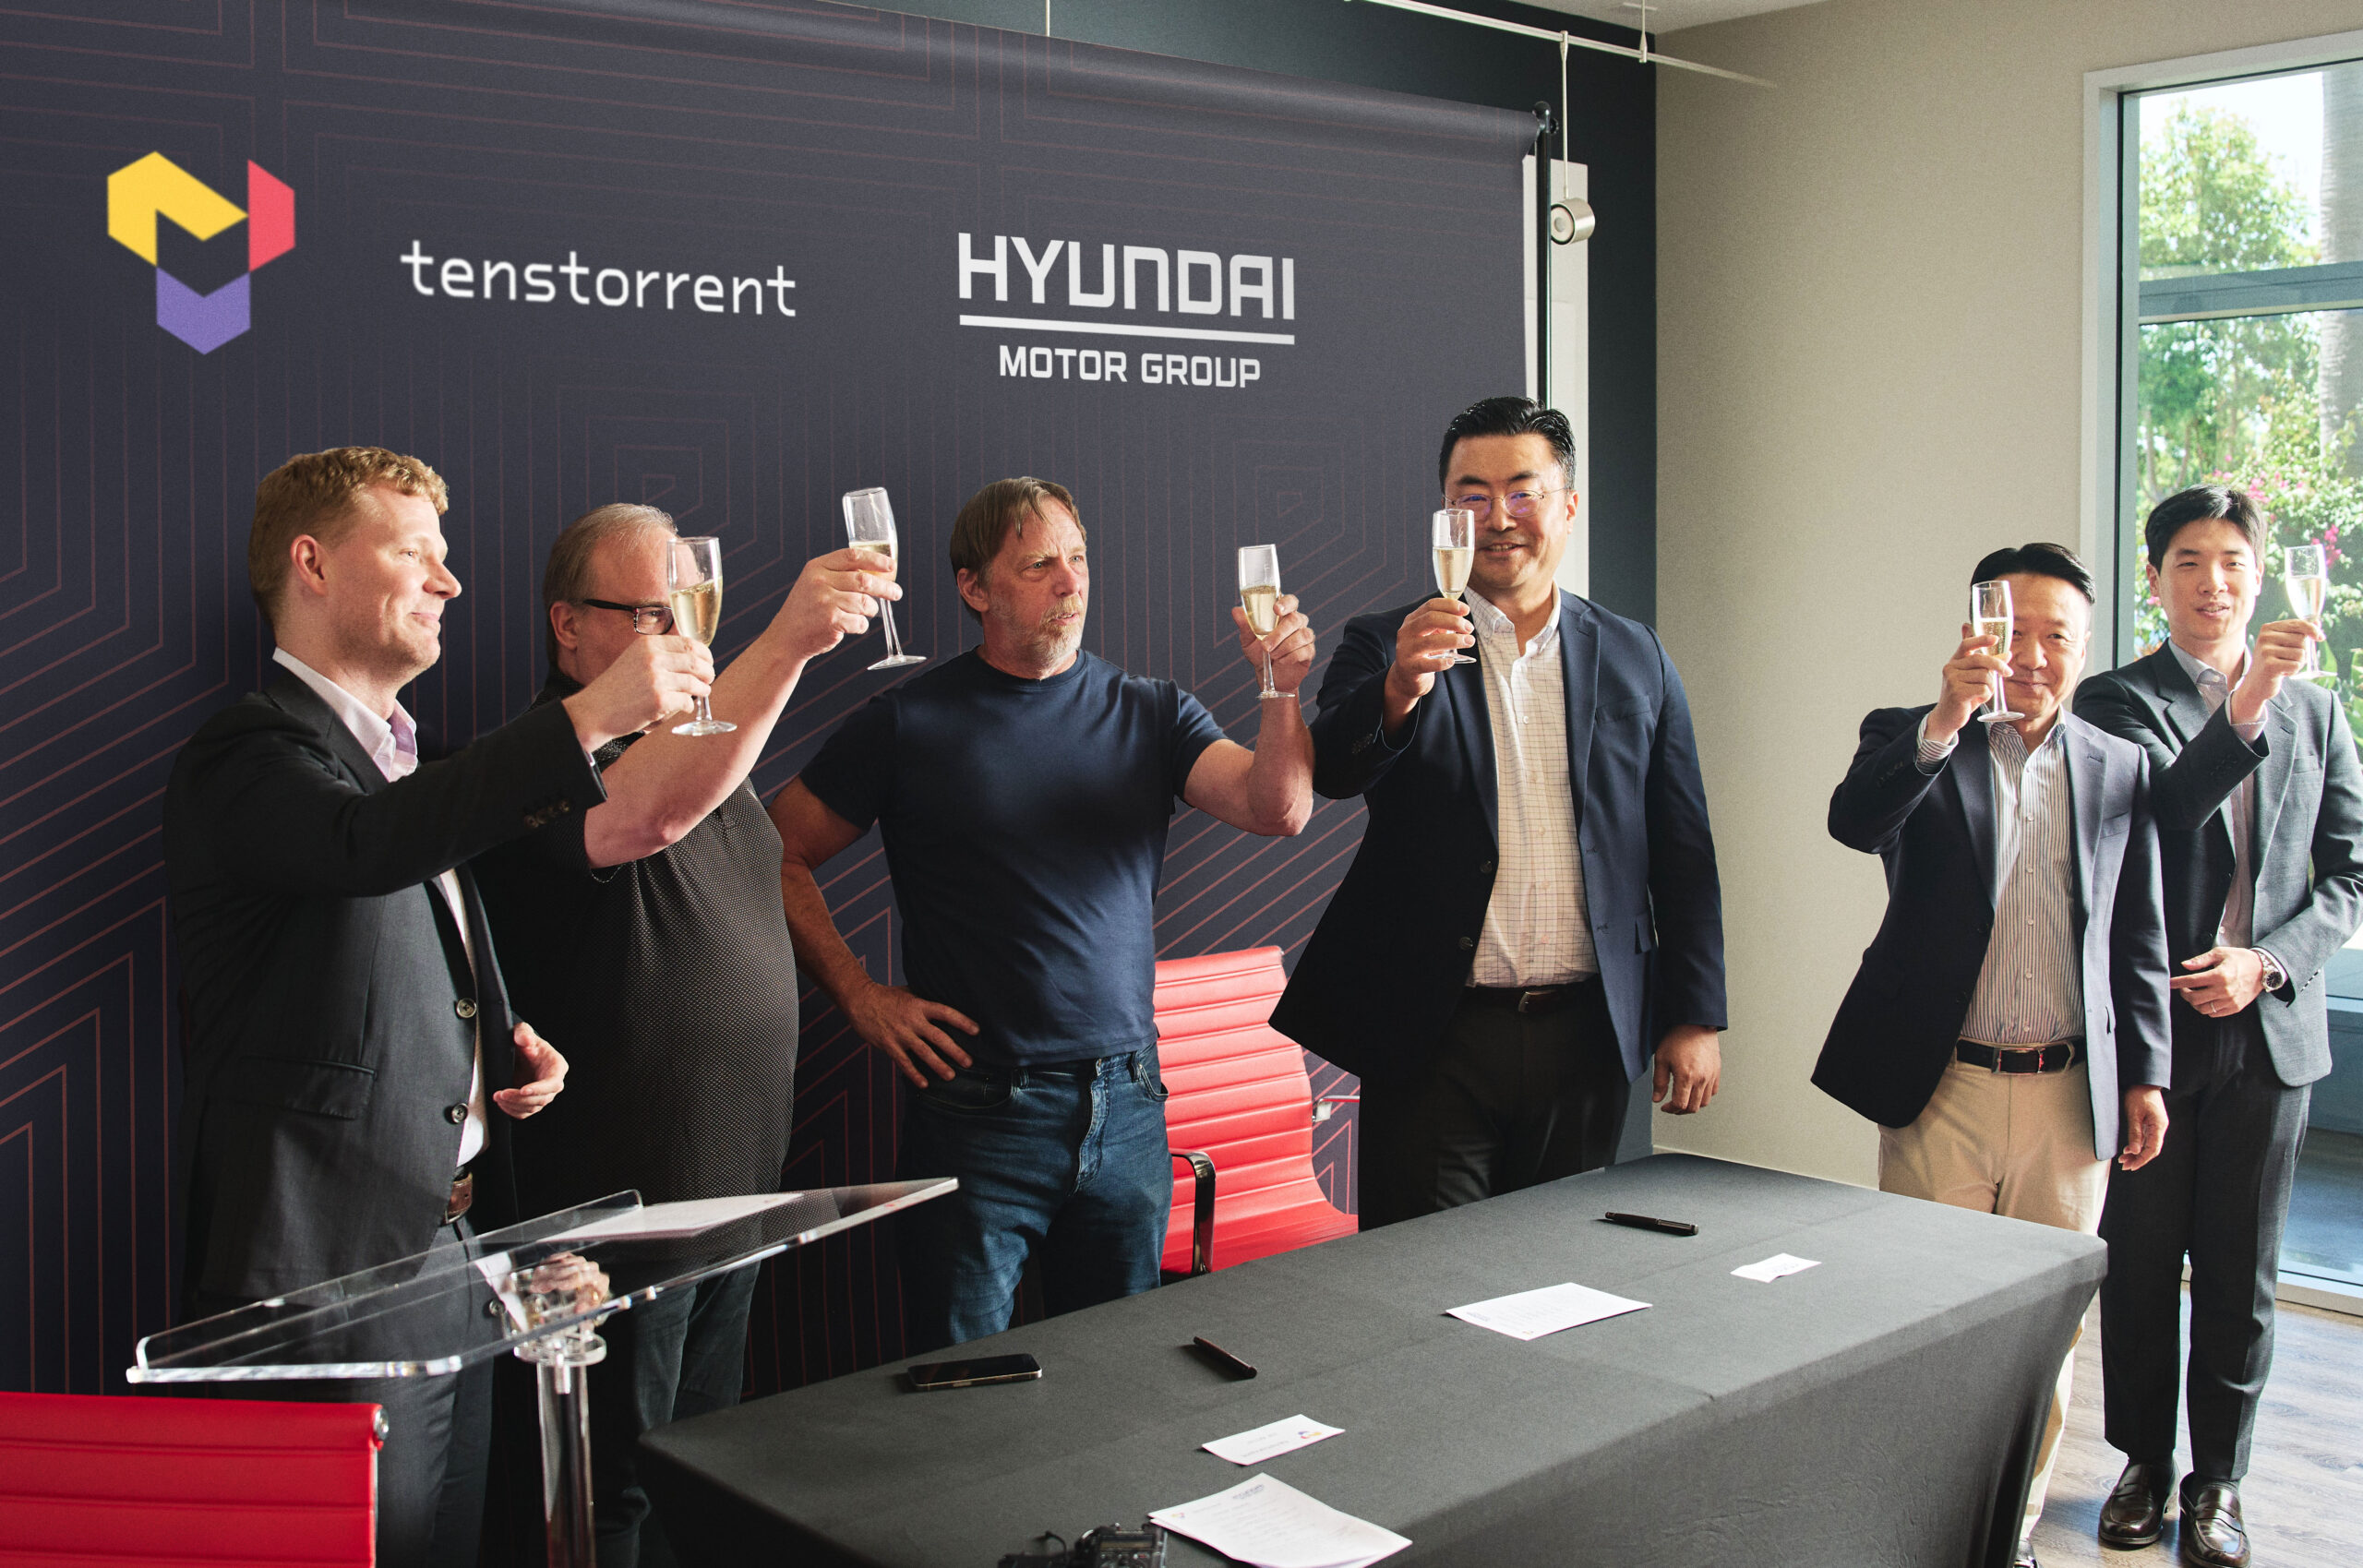 Tenstorrent celebrating its Series D round with Hyundai Motor Group